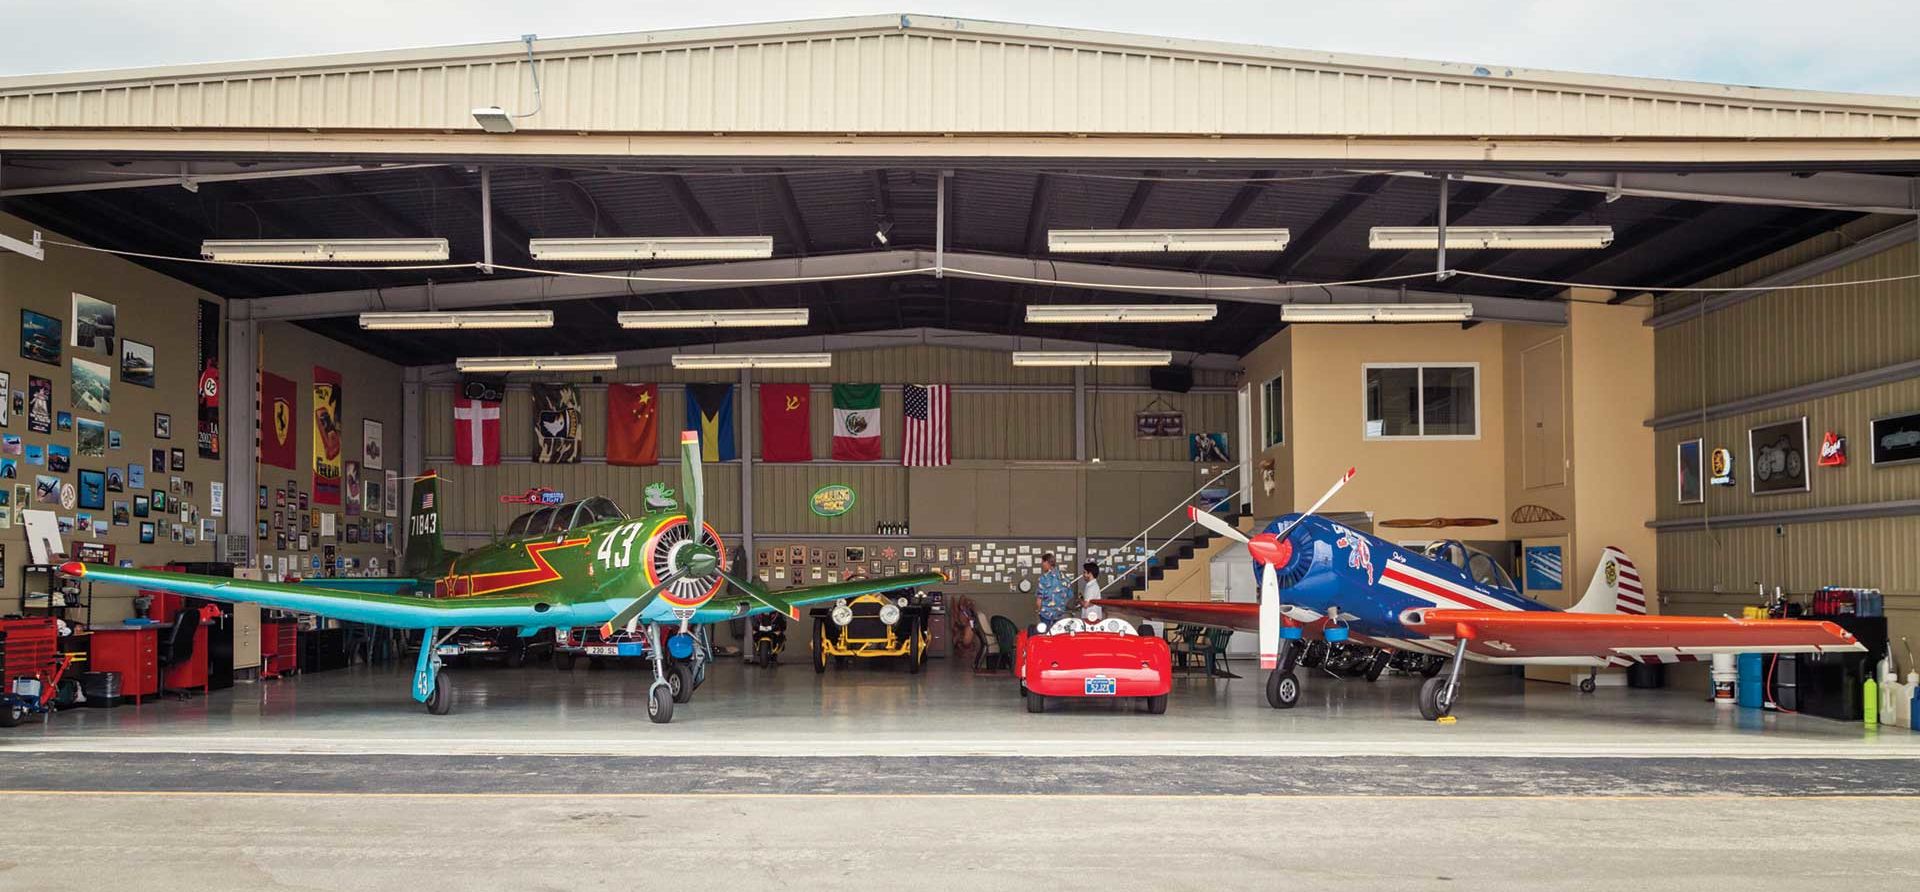 Airplanes and Vintage Cars in a Hangar